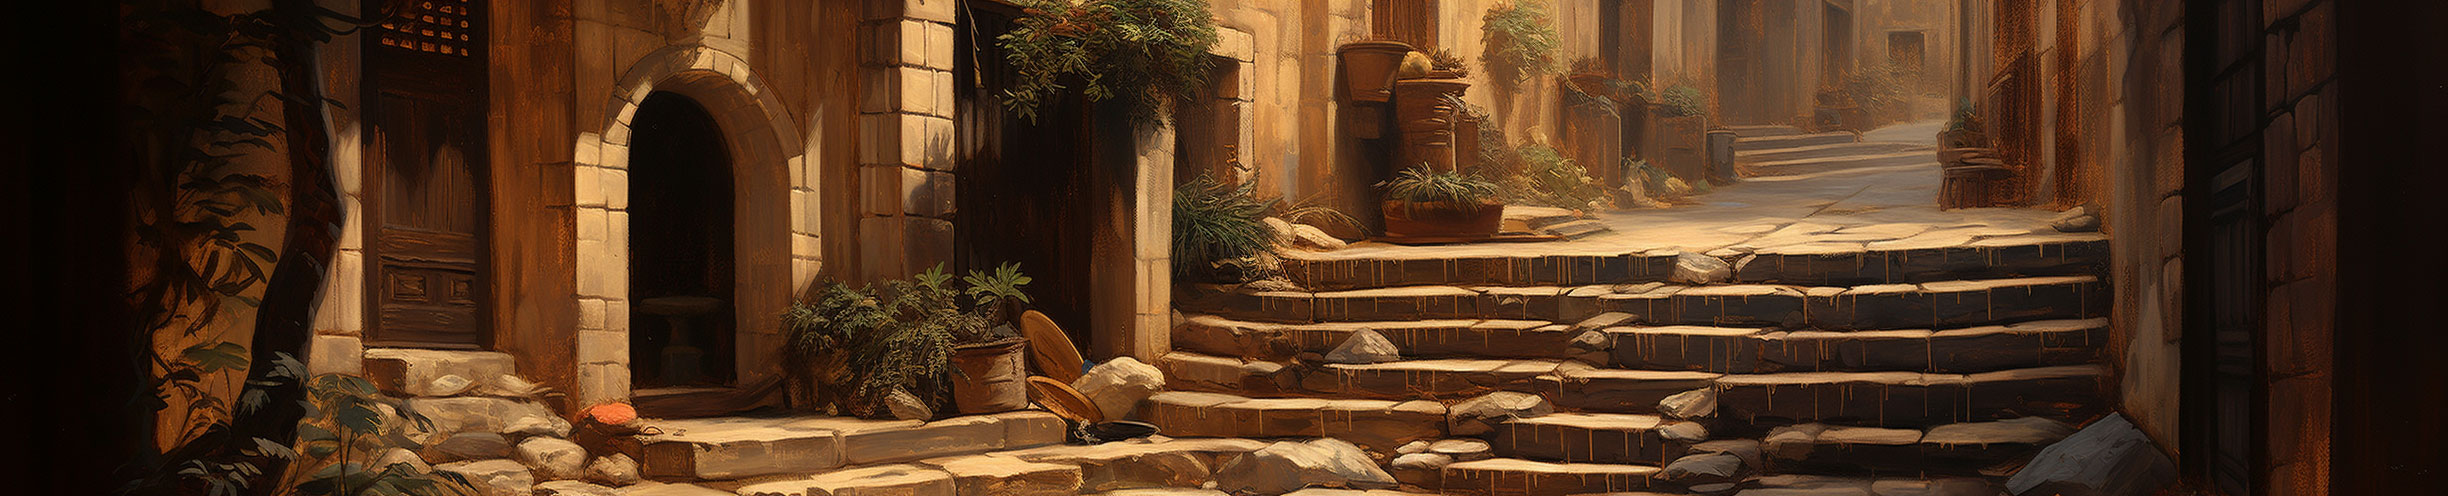 tychodreq_a_finely_detailed_oil_painting_of_a_stone_stairs_lead_a35eb9ef-18c1-412e-ab66-5d86f6623855.jpg